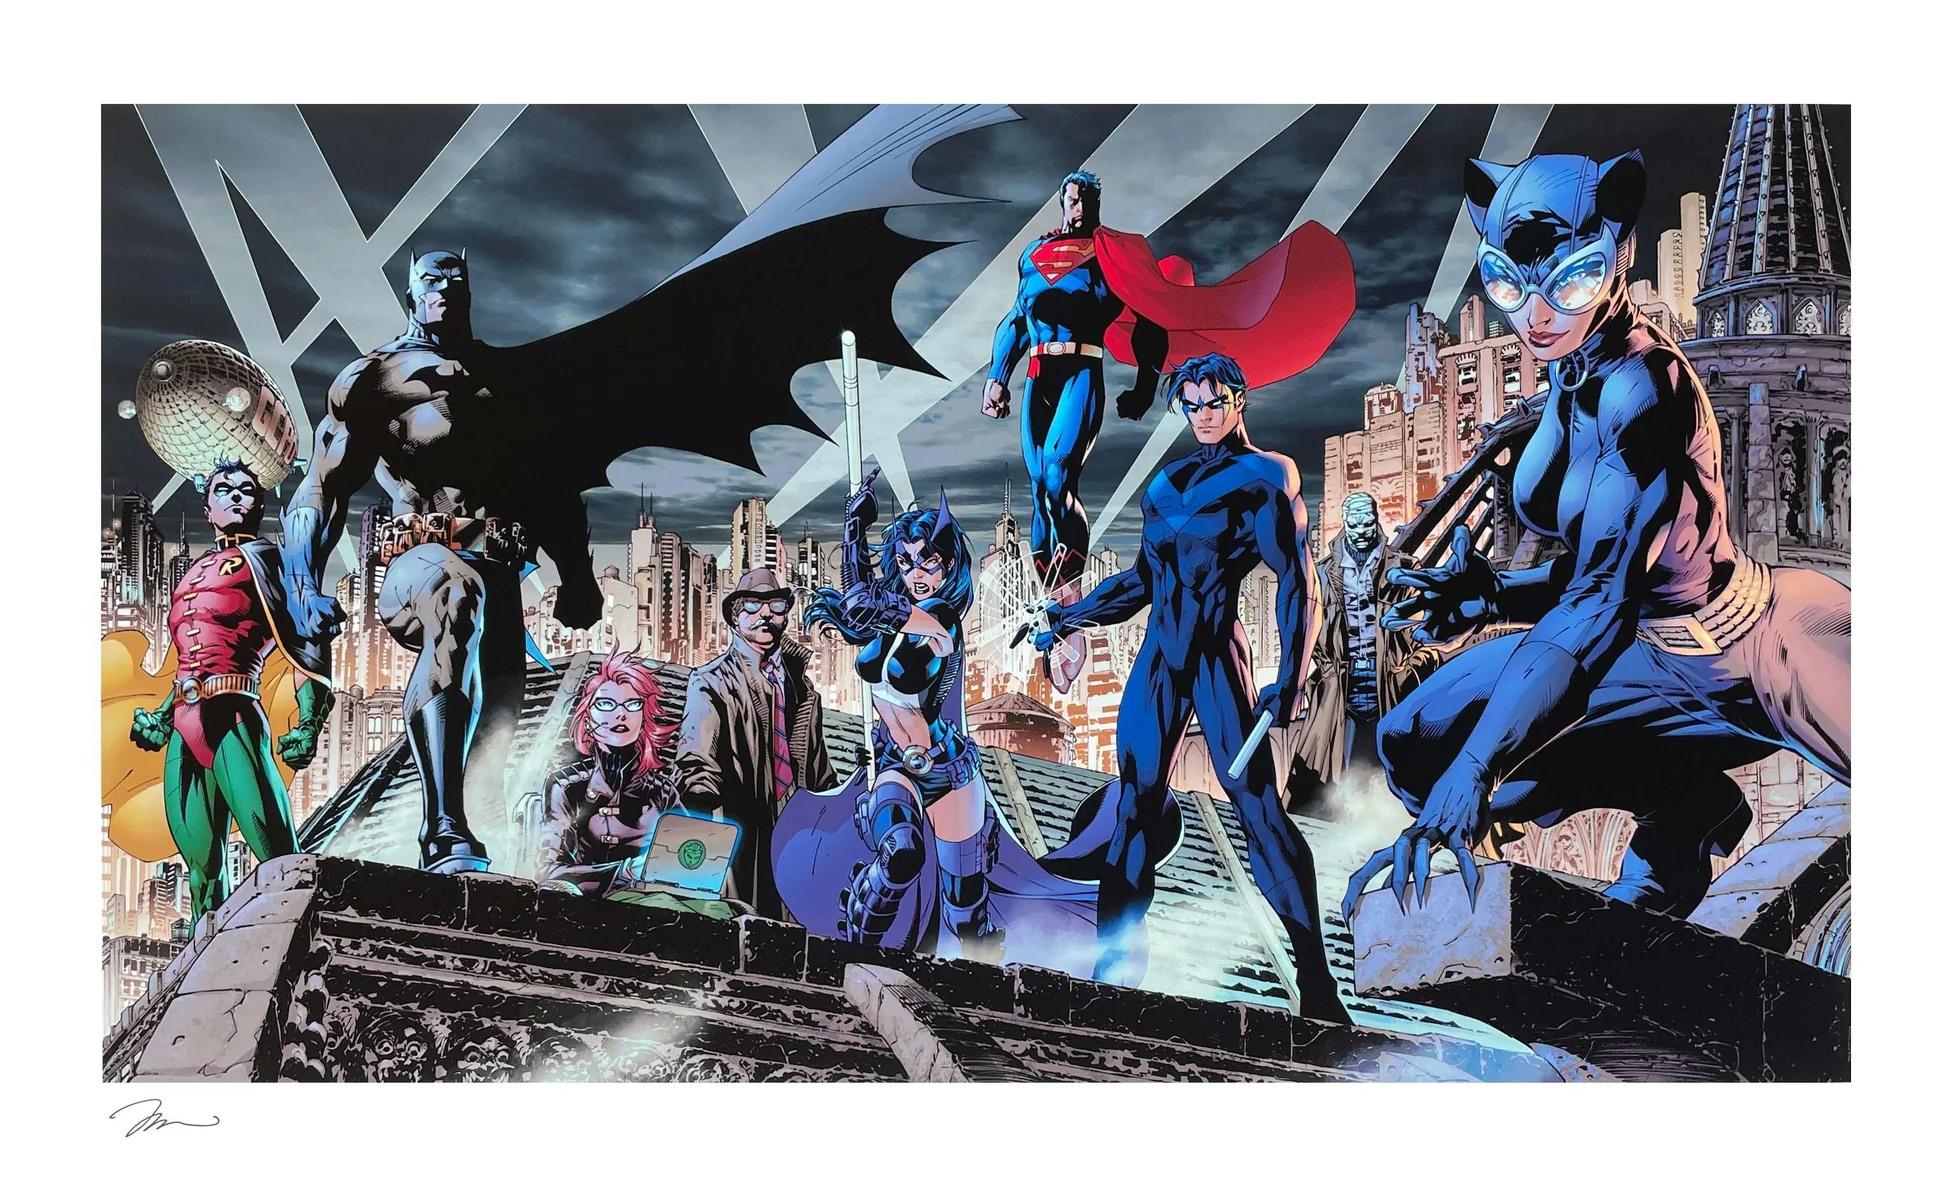 MEDIUM:  Giclée on Canvas
SIZE: 42" x 23.5"
EDITION SIZE: 100
SIGNED: Jim Lee
SKU: ﻿ CP1330D

DESCRIPTION:  Taken from the renown series Batman: Hush, which premiered in 2001, "Heroes" is one of the two triple-gate-fold comic book covers for Batman